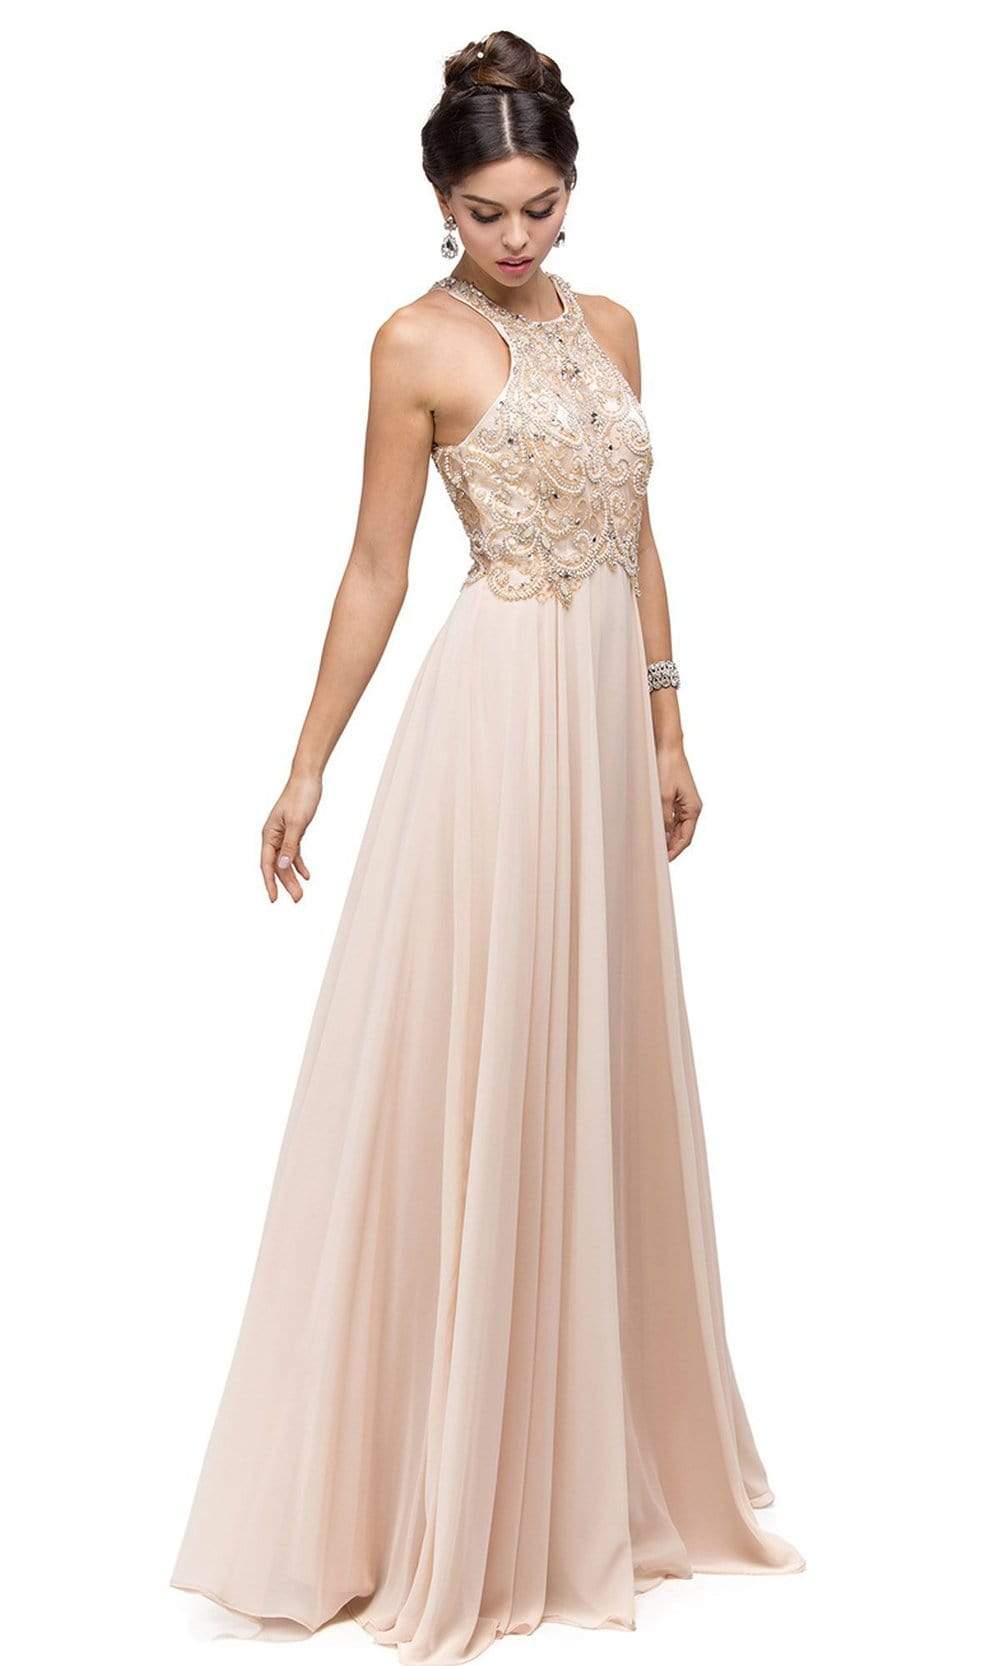 Dancing Queen - 9776 Chiffon Halter A-Line Evening Dress Special Occasion Dress XS / Champagne